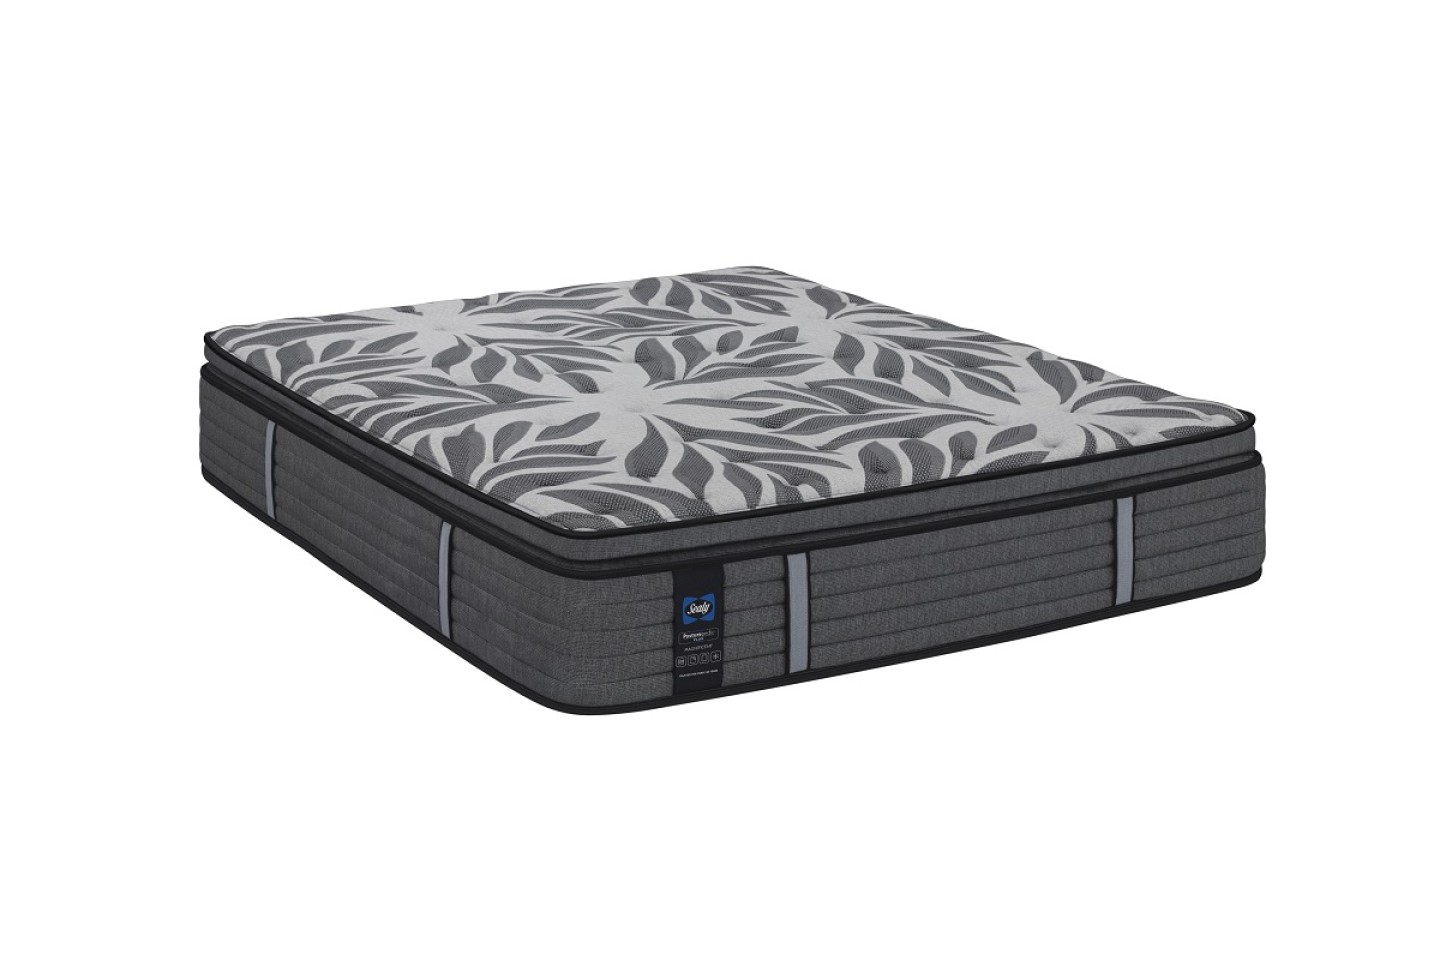 THE MAGNIFICENT MATTRESS by Sealy